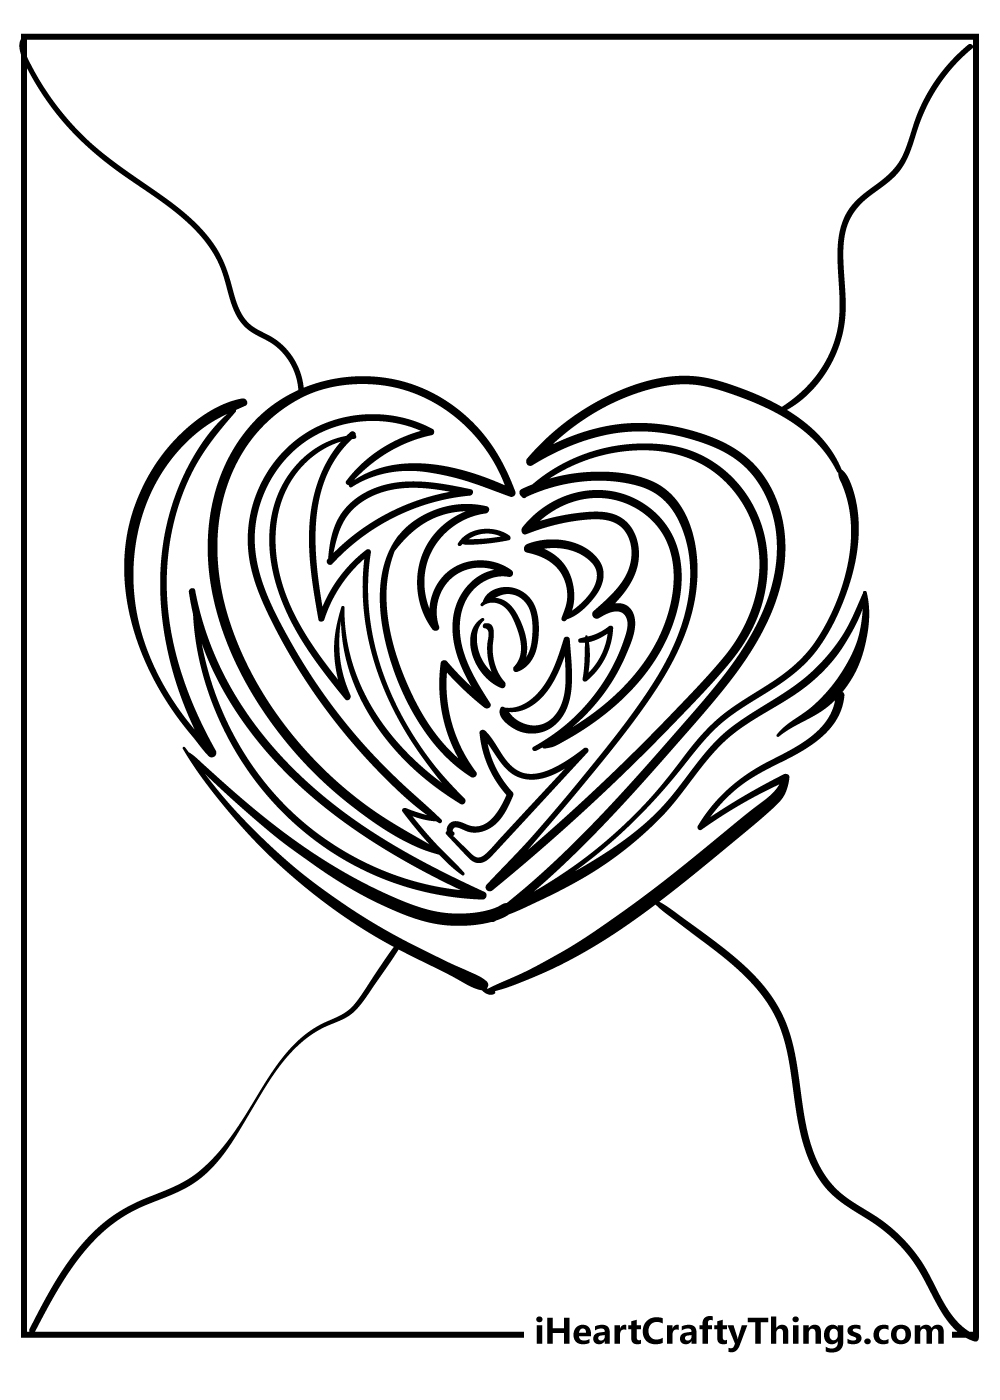 Heart coloring pages free printable